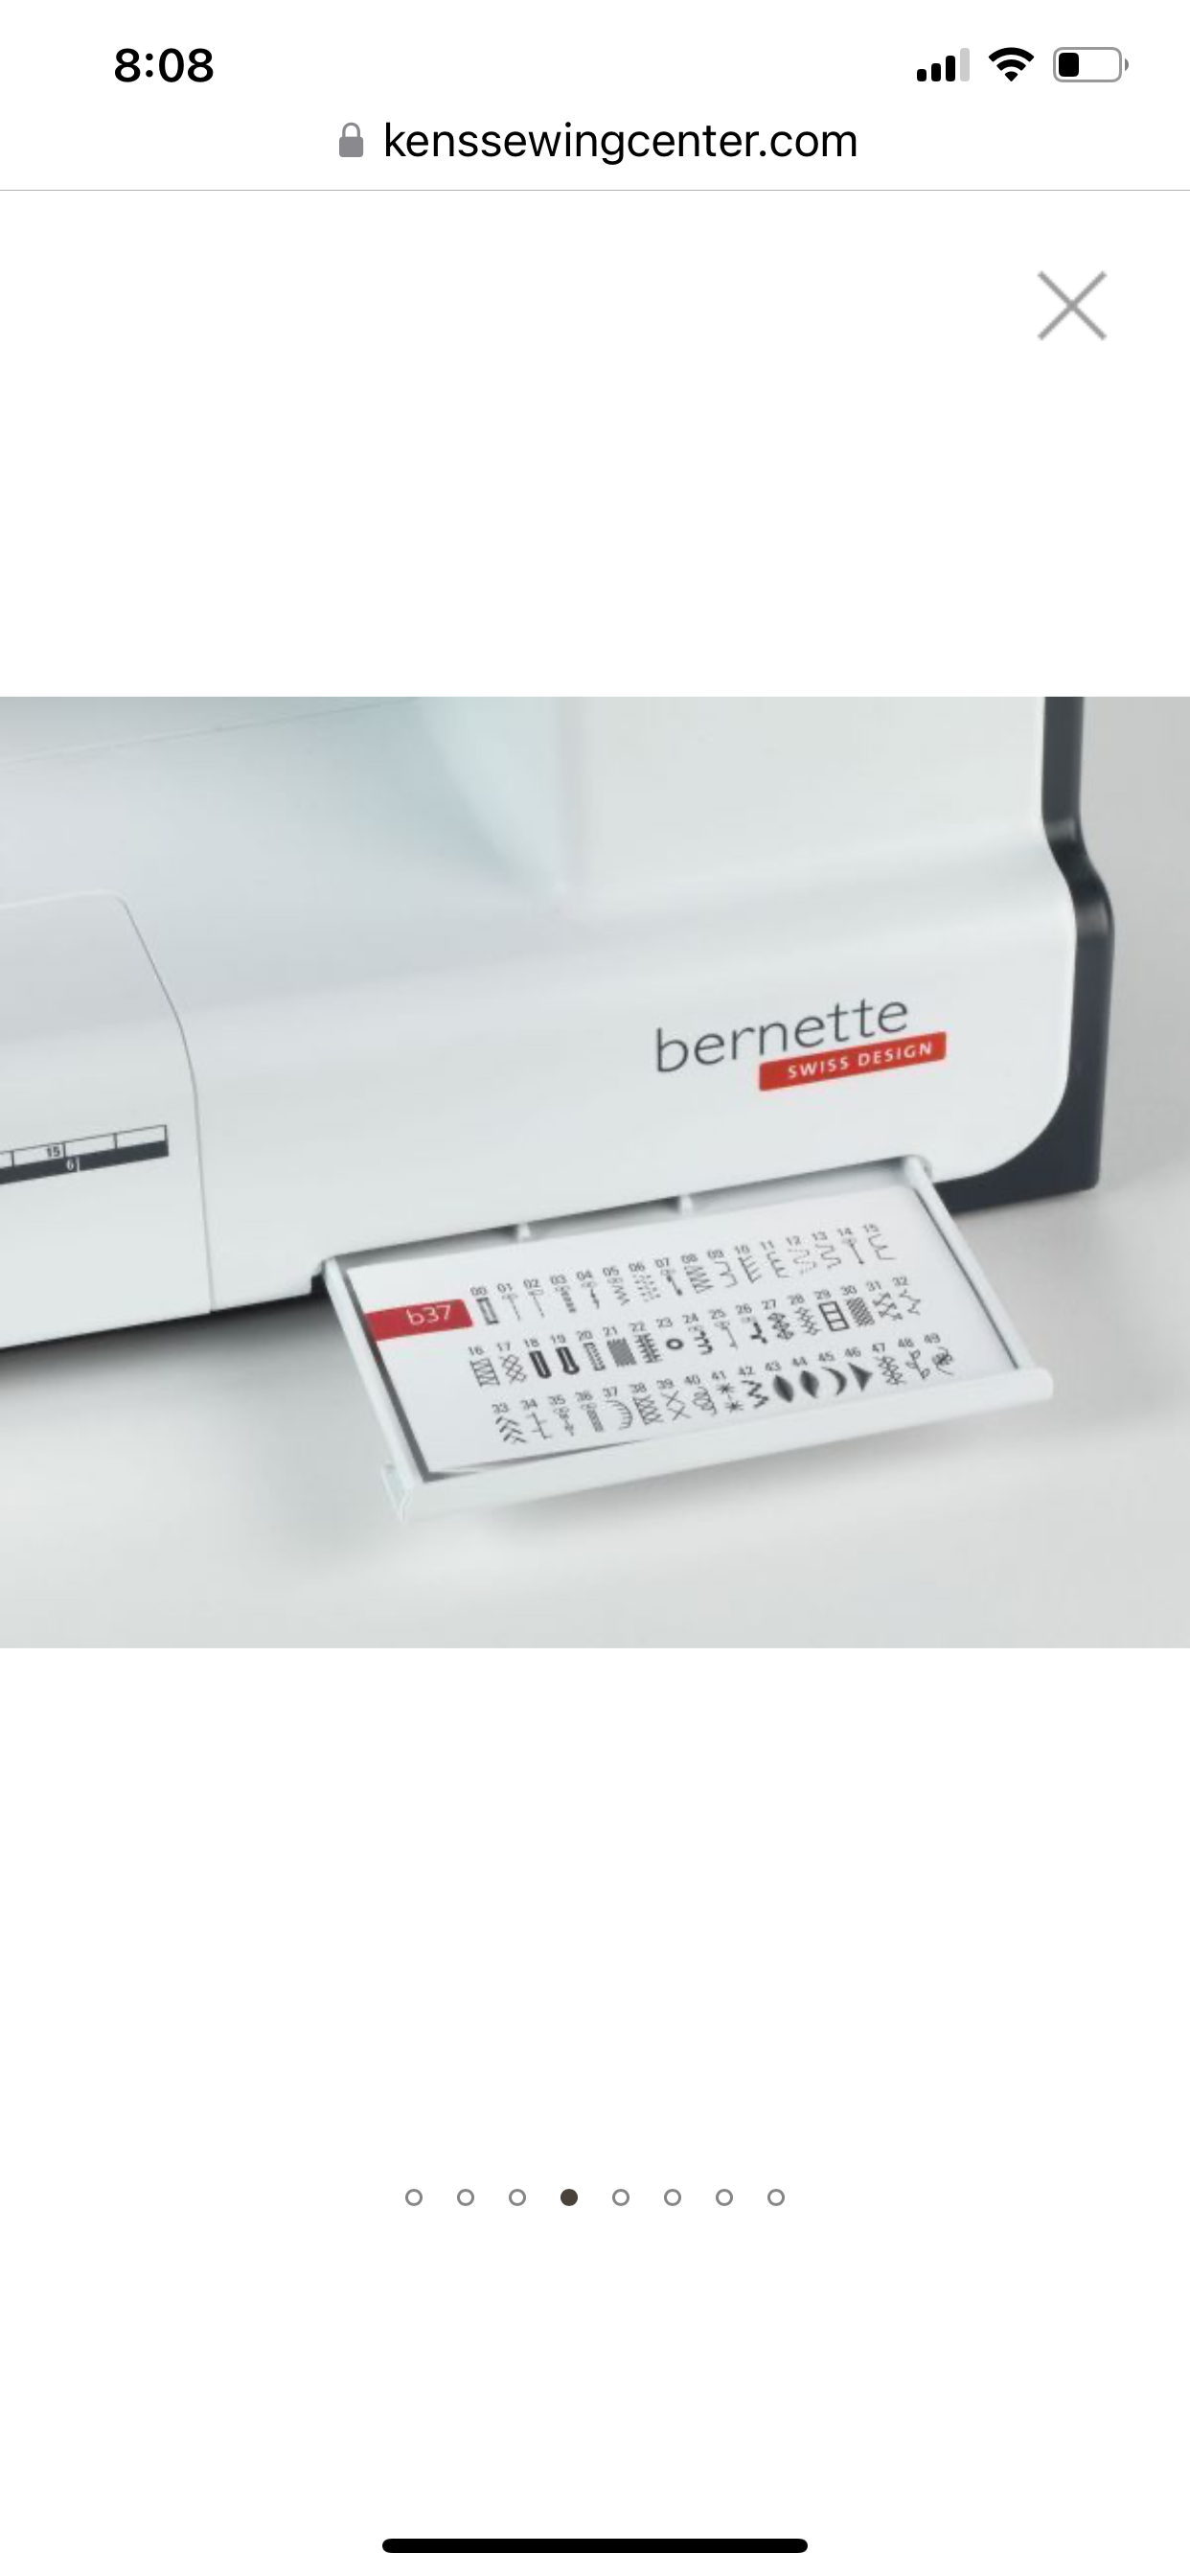 Bernette b37 Sewing Machine, online only